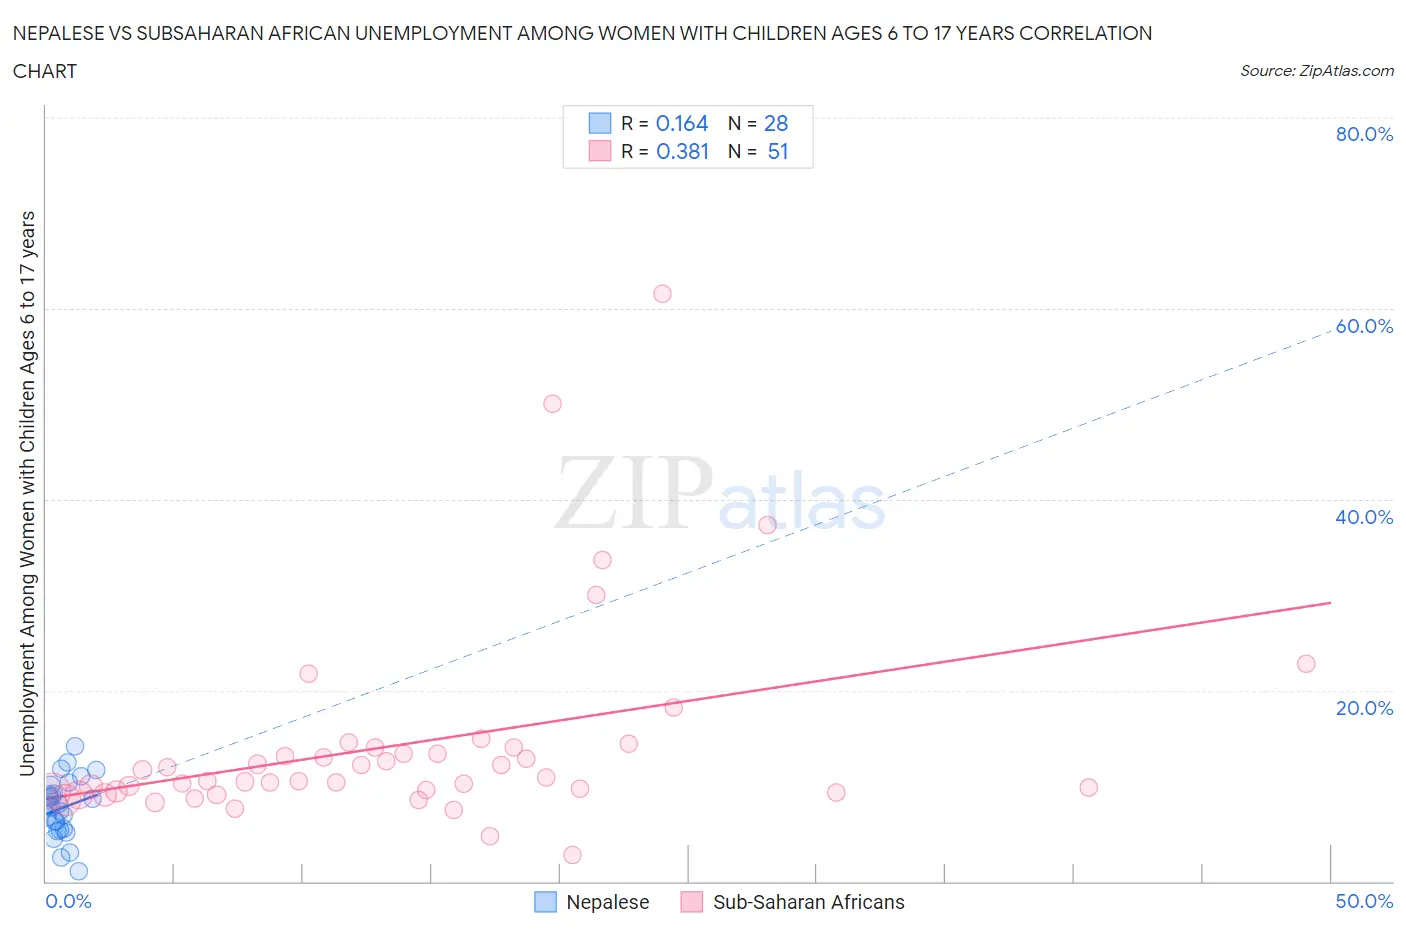 Nepalese vs Subsaharan African Unemployment Among Women with Children Ages 6 to 17 years